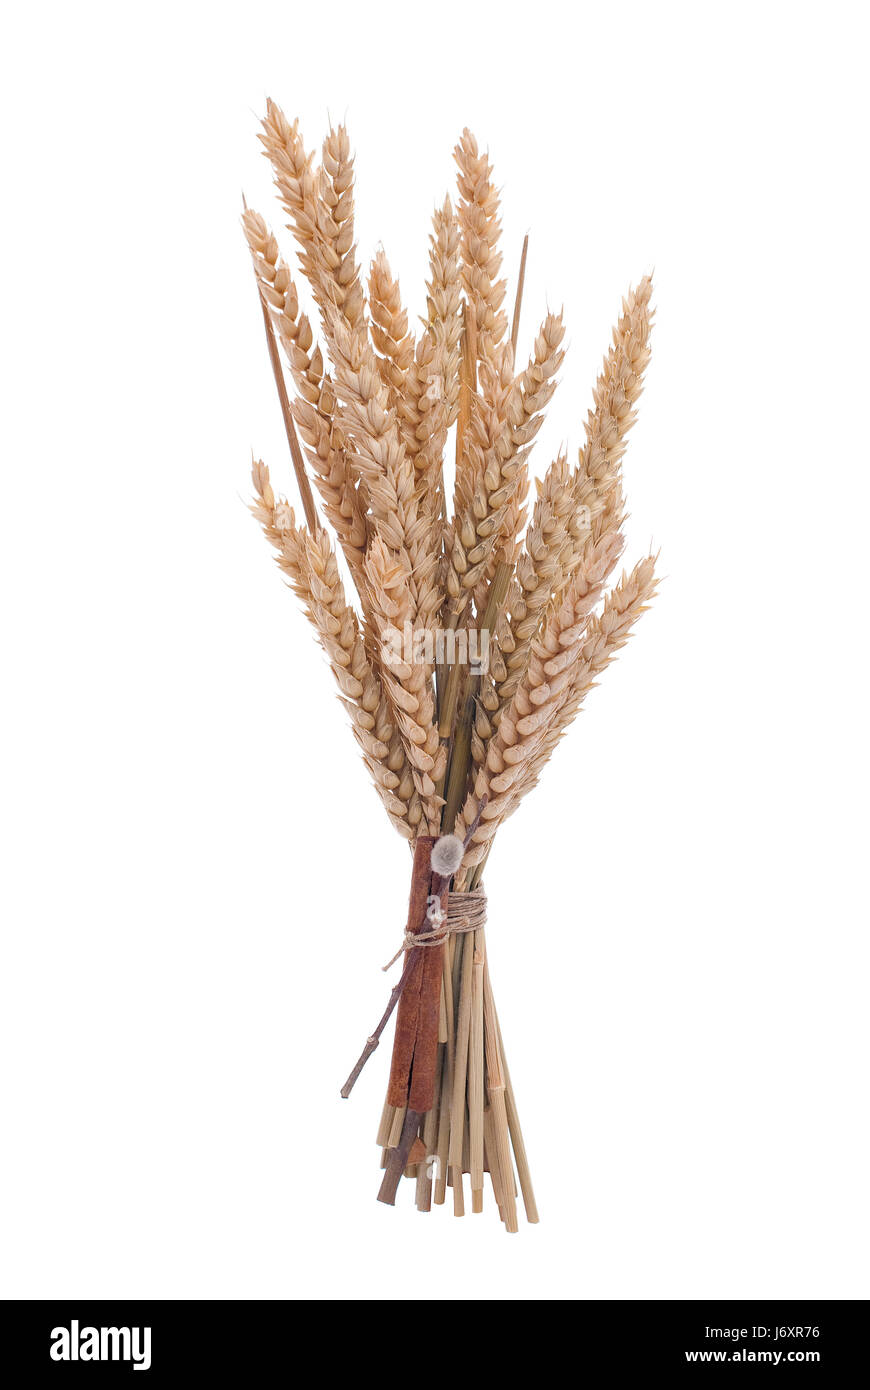 food aliment cereals cereal commodities grain food aliment field wheat ear Stock Photo